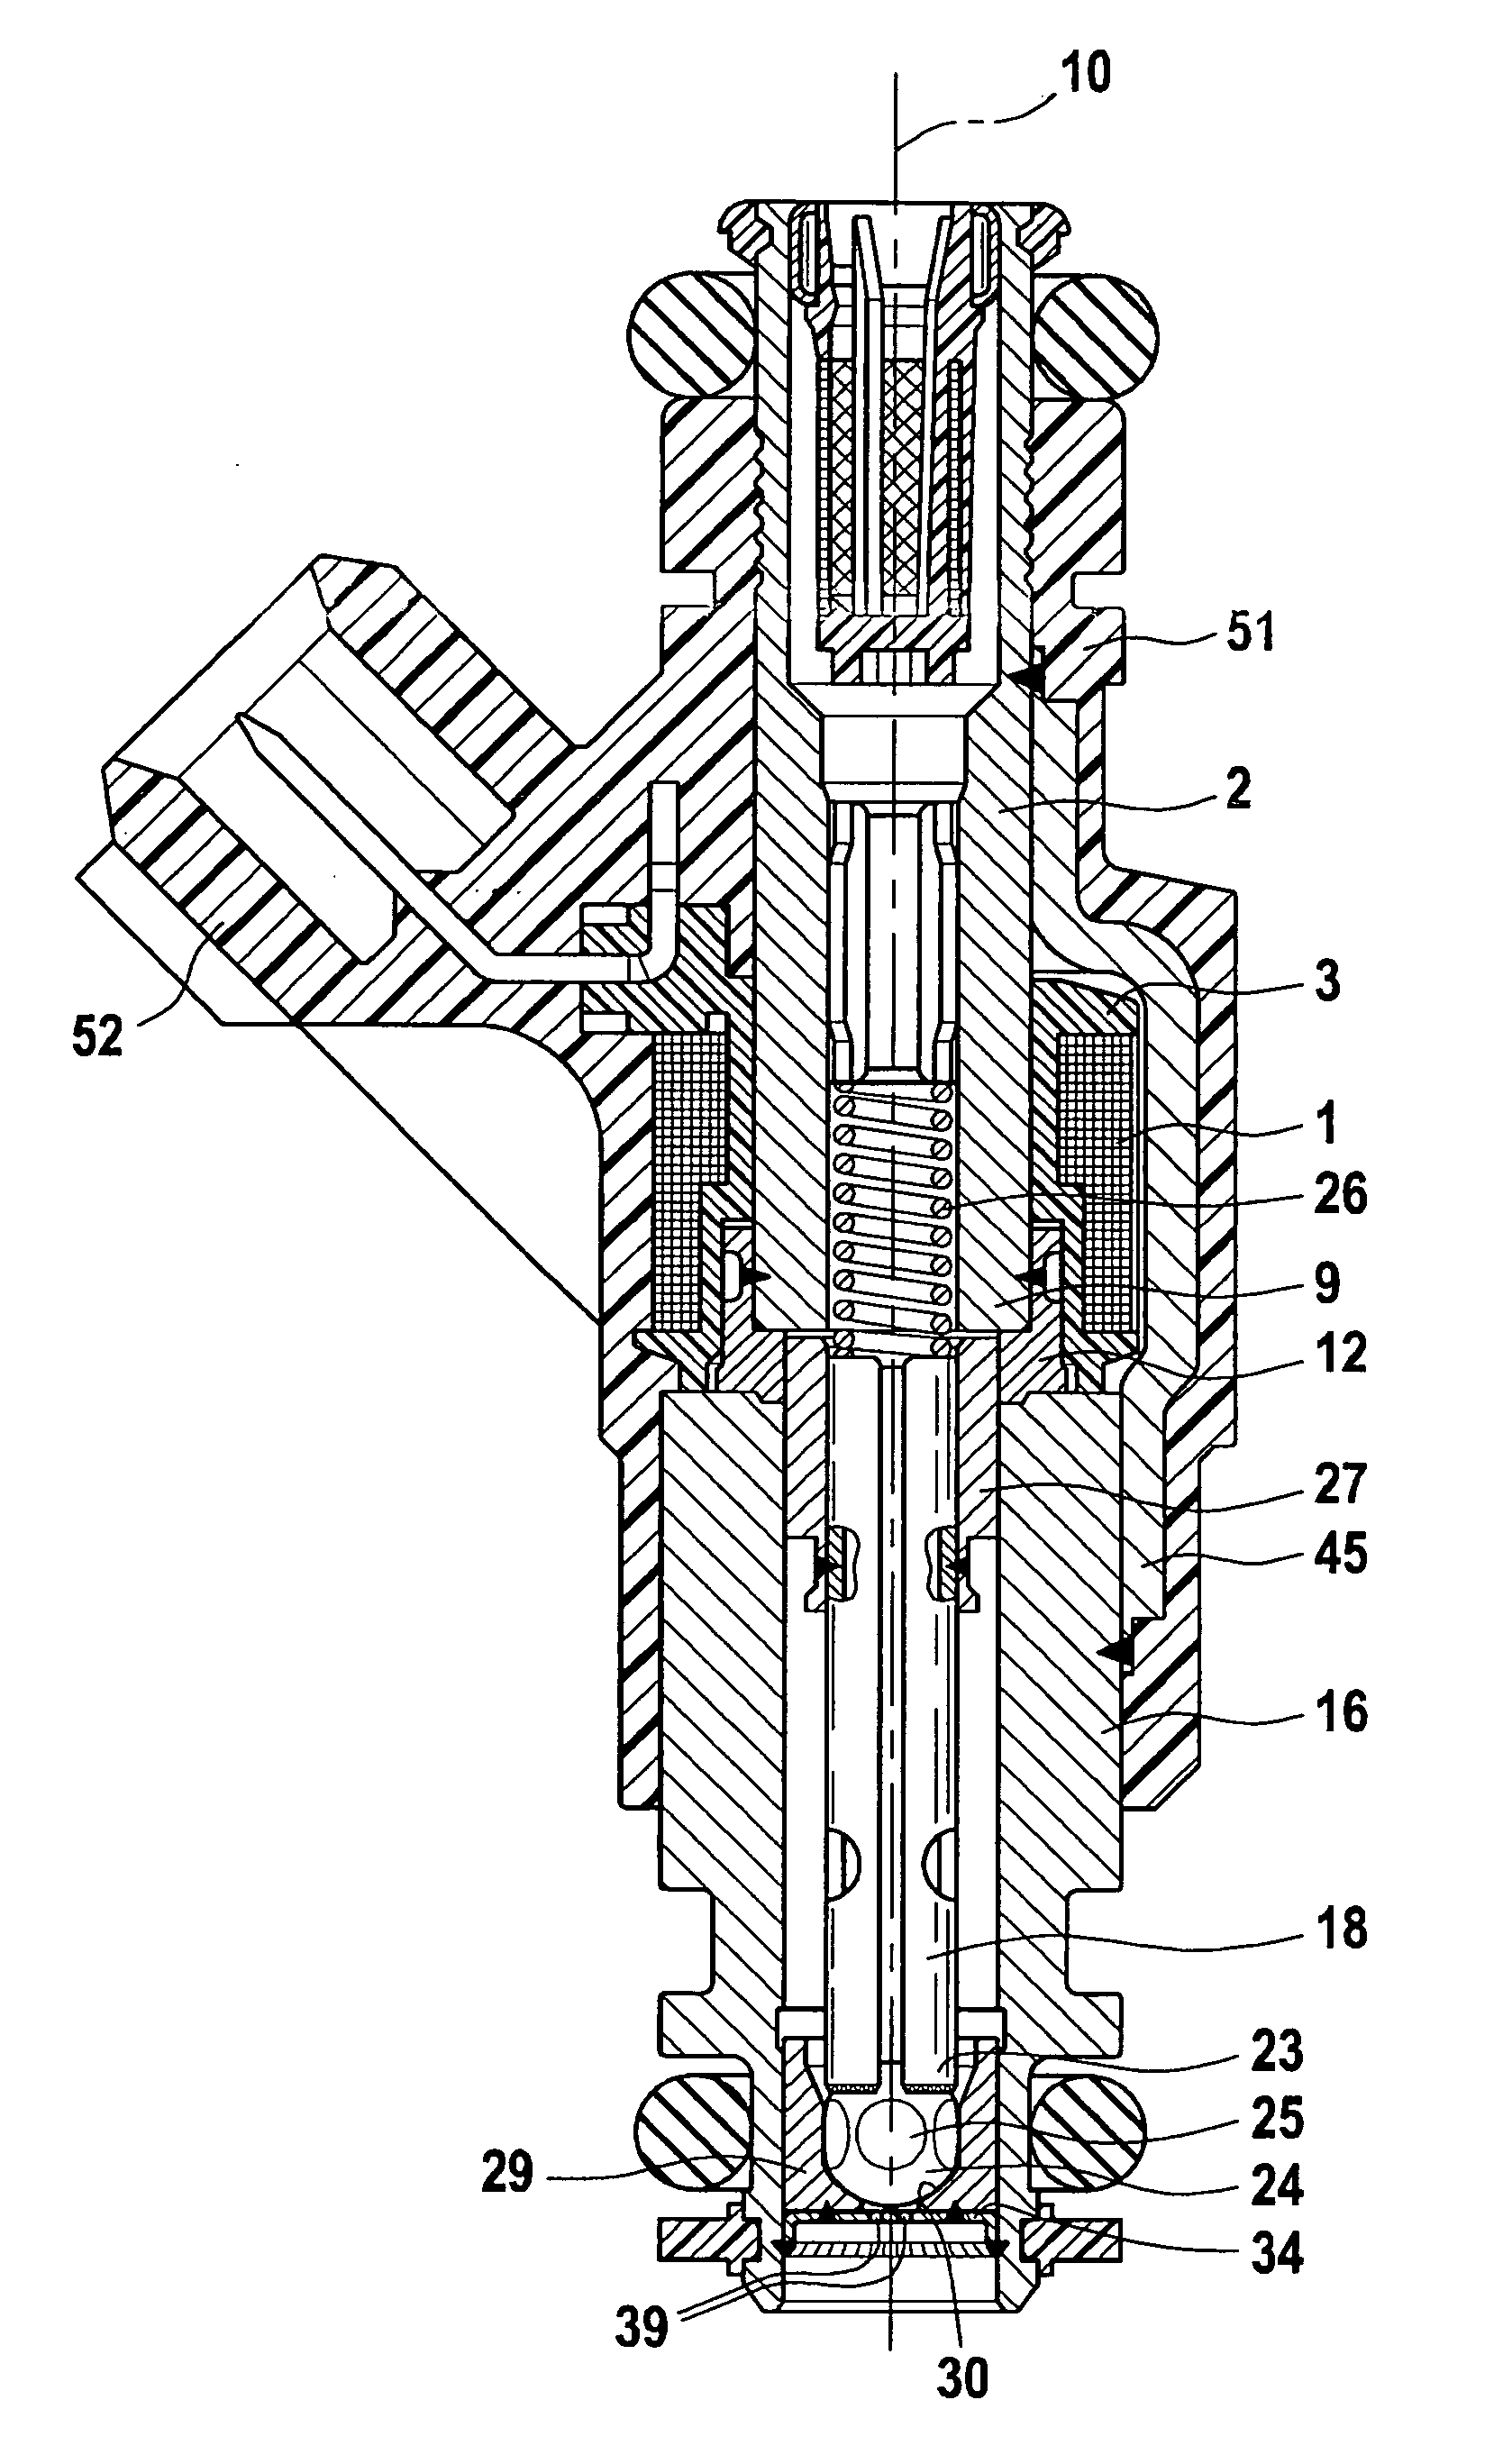 Method for manufacturing a metal composite component, in particular for an electromagnetic valve